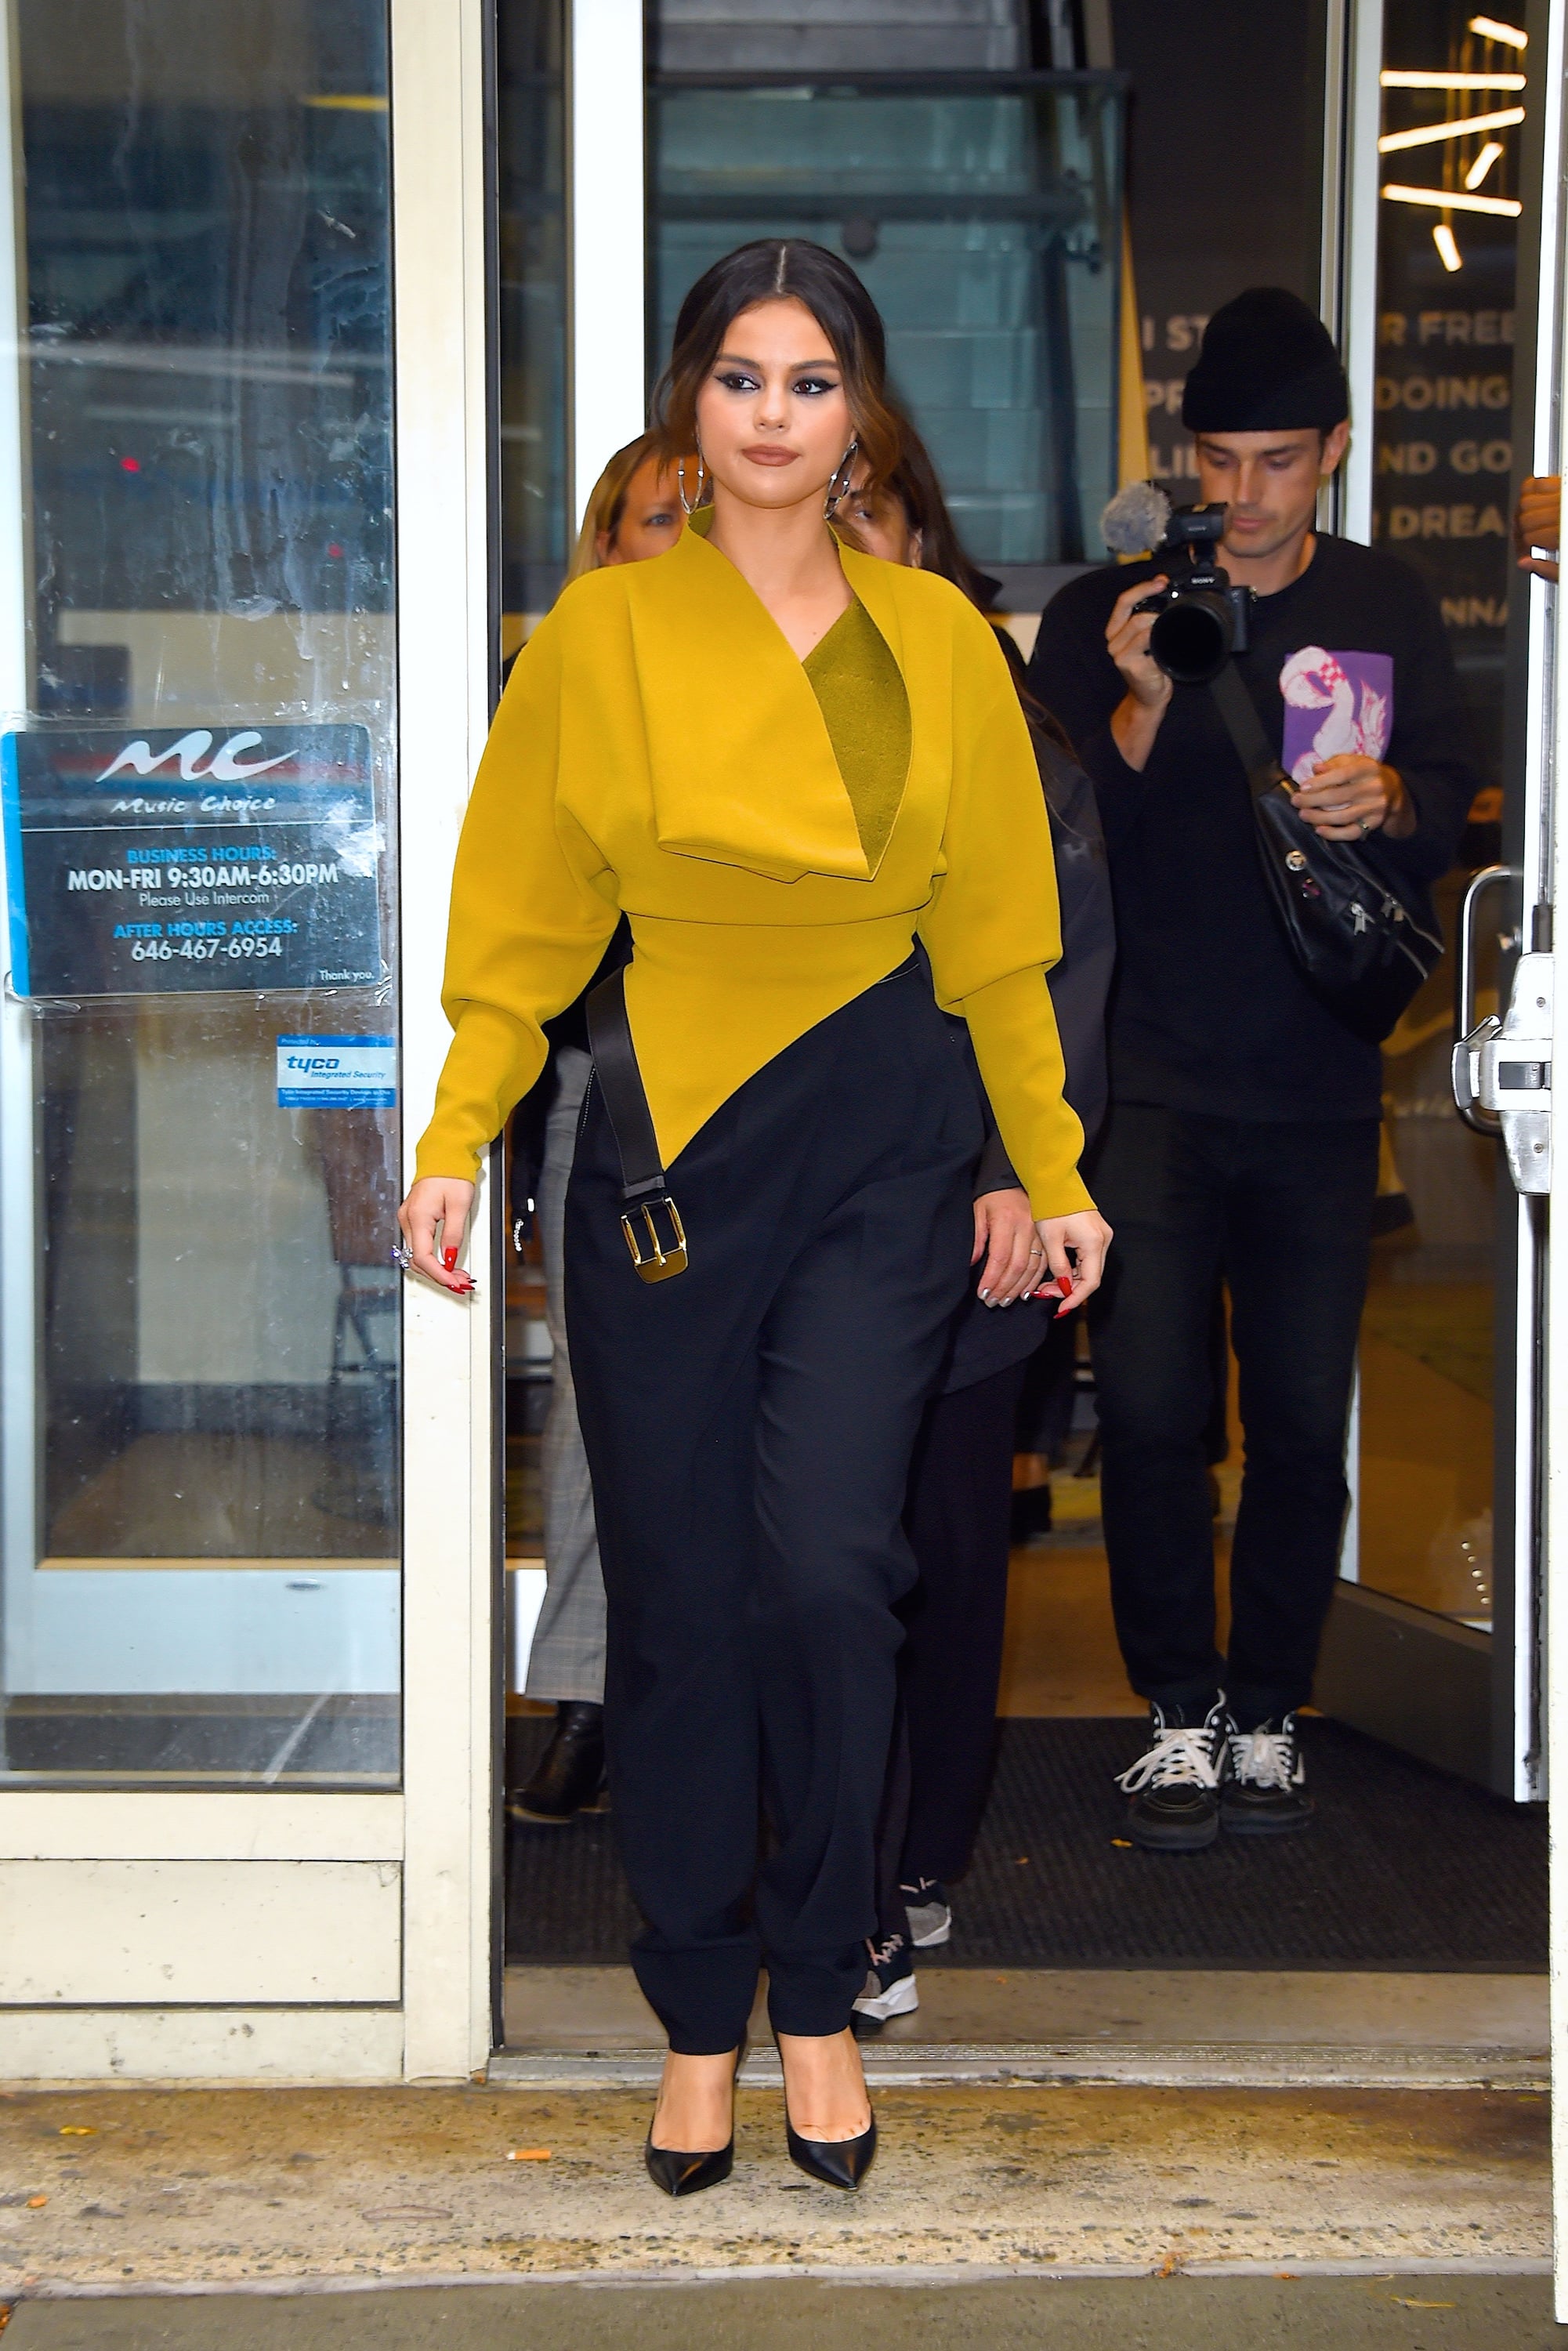 Spotted: Selena Gomez in NYC looking ultra-chic in a trench coat